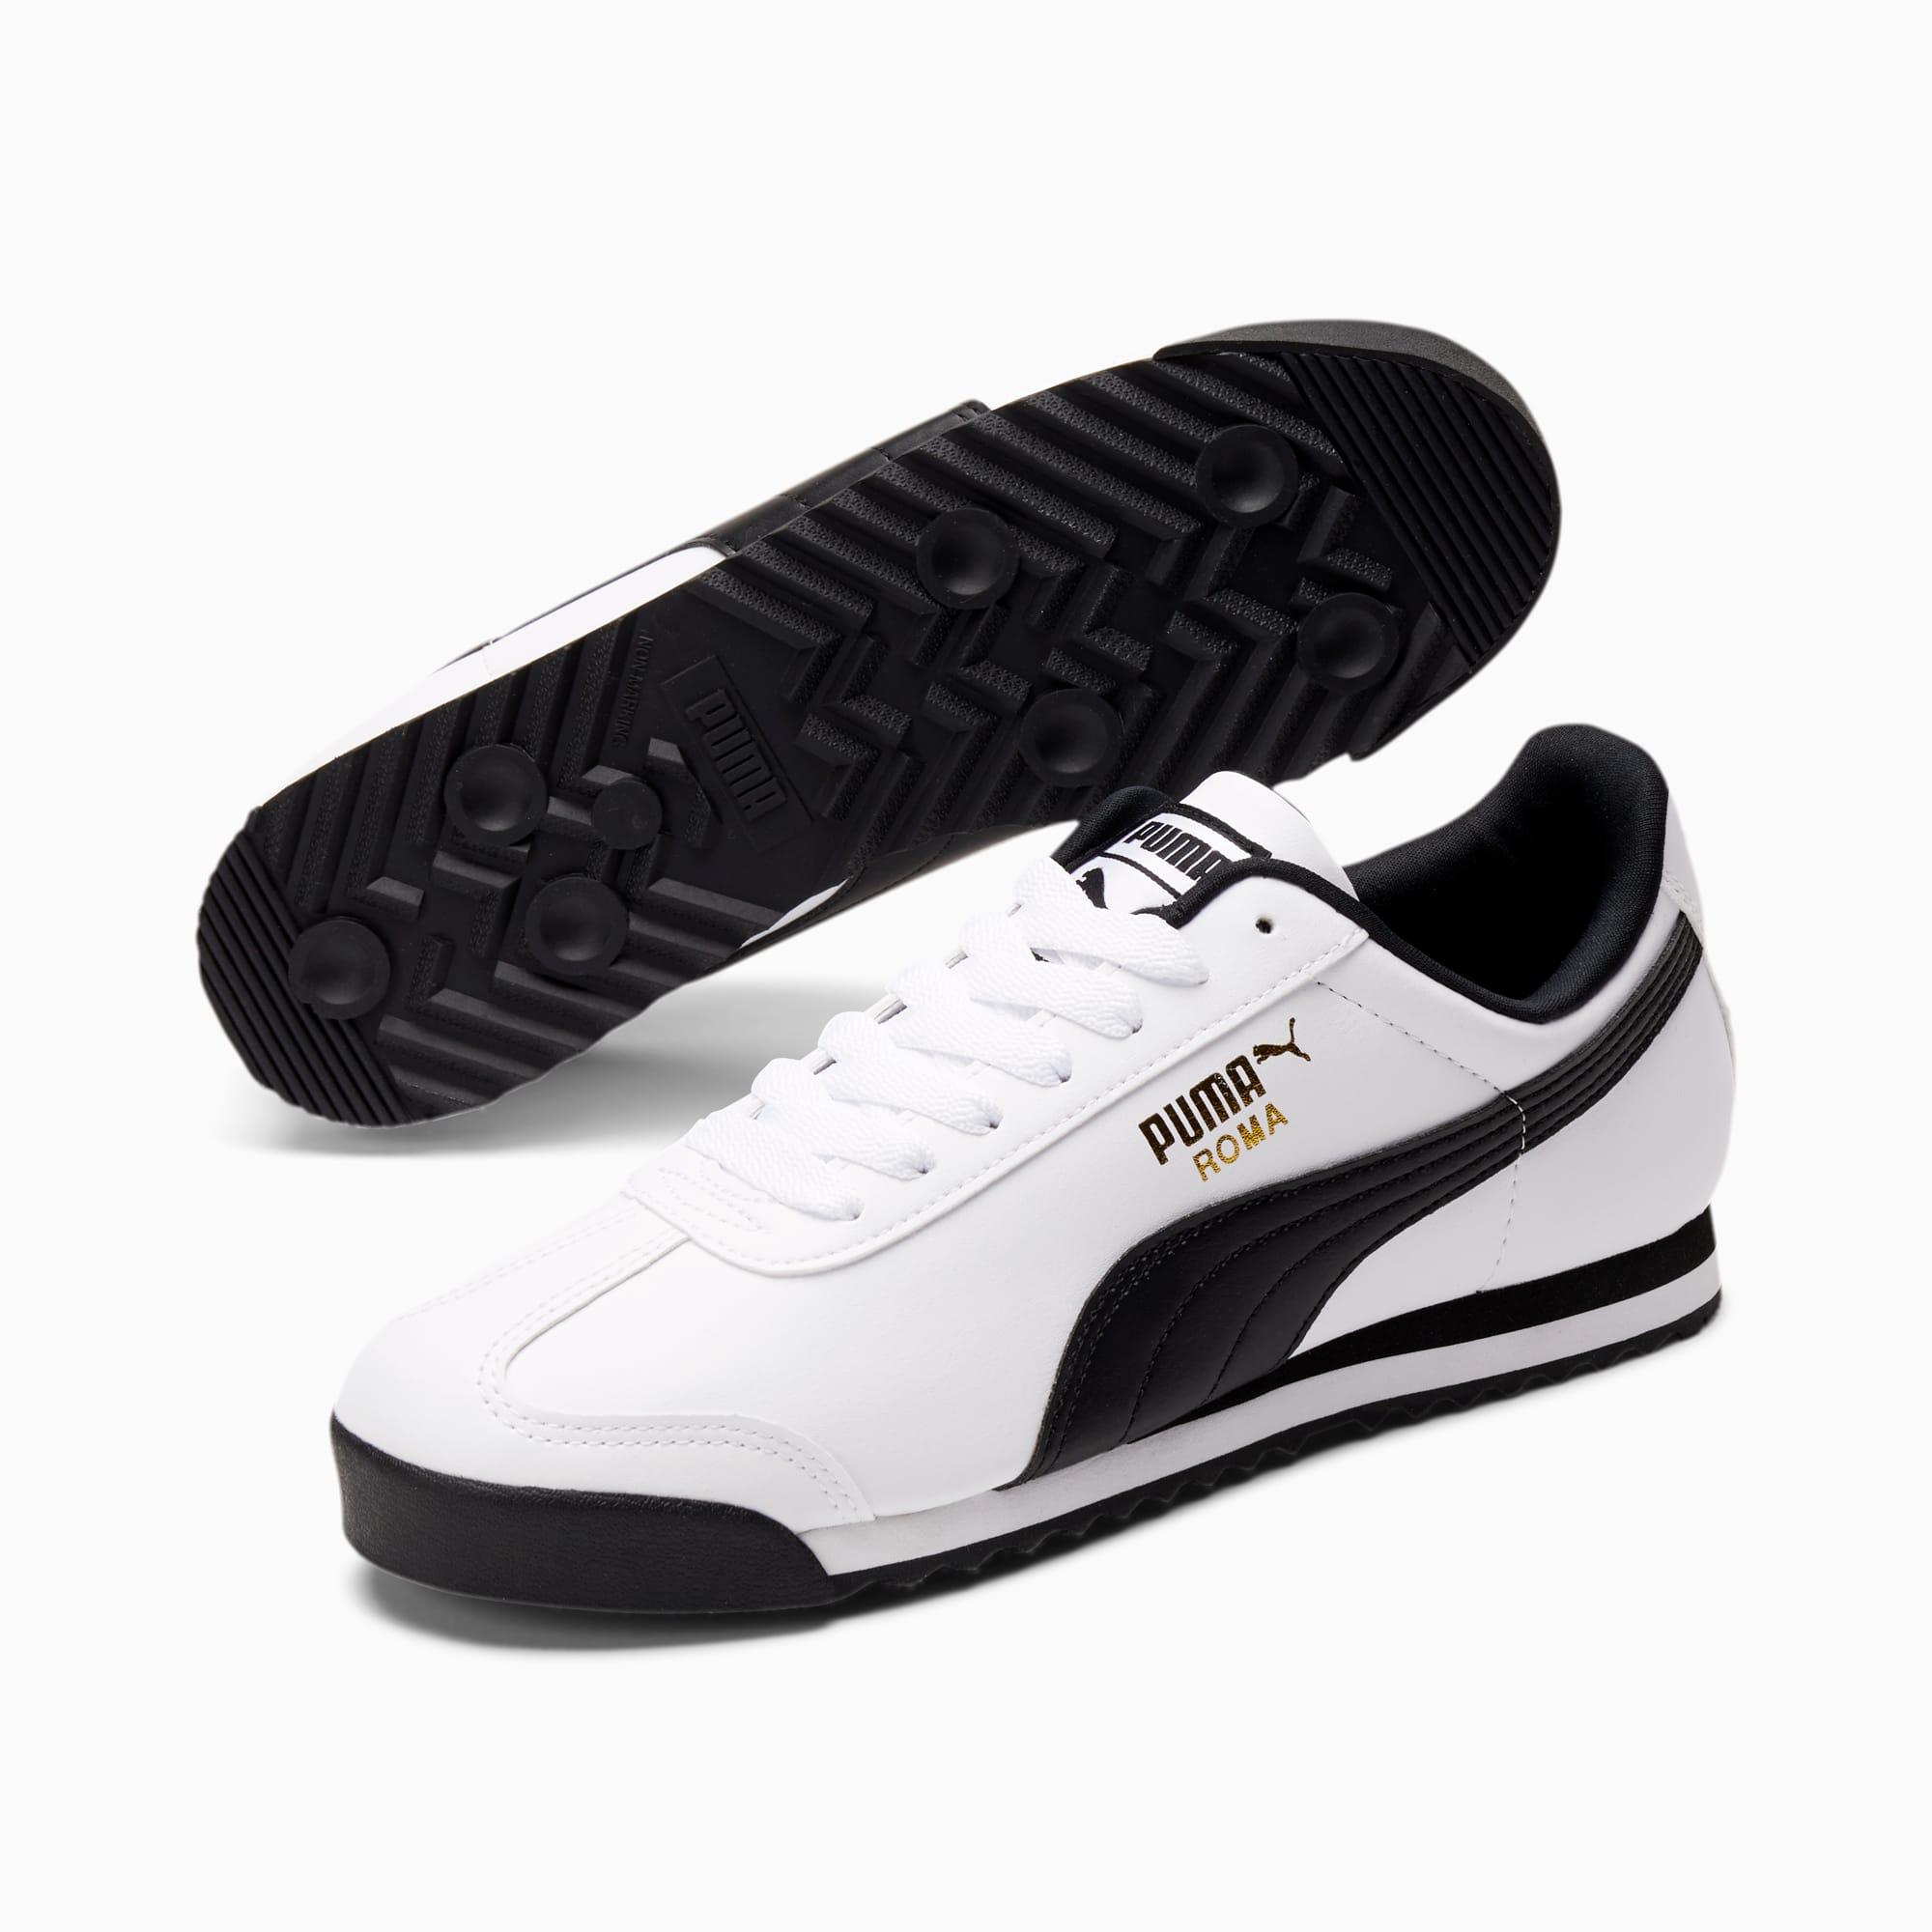 PUMA Synthetic Roma Basic Sneakers in White-Black (Black) for Men - Lyst